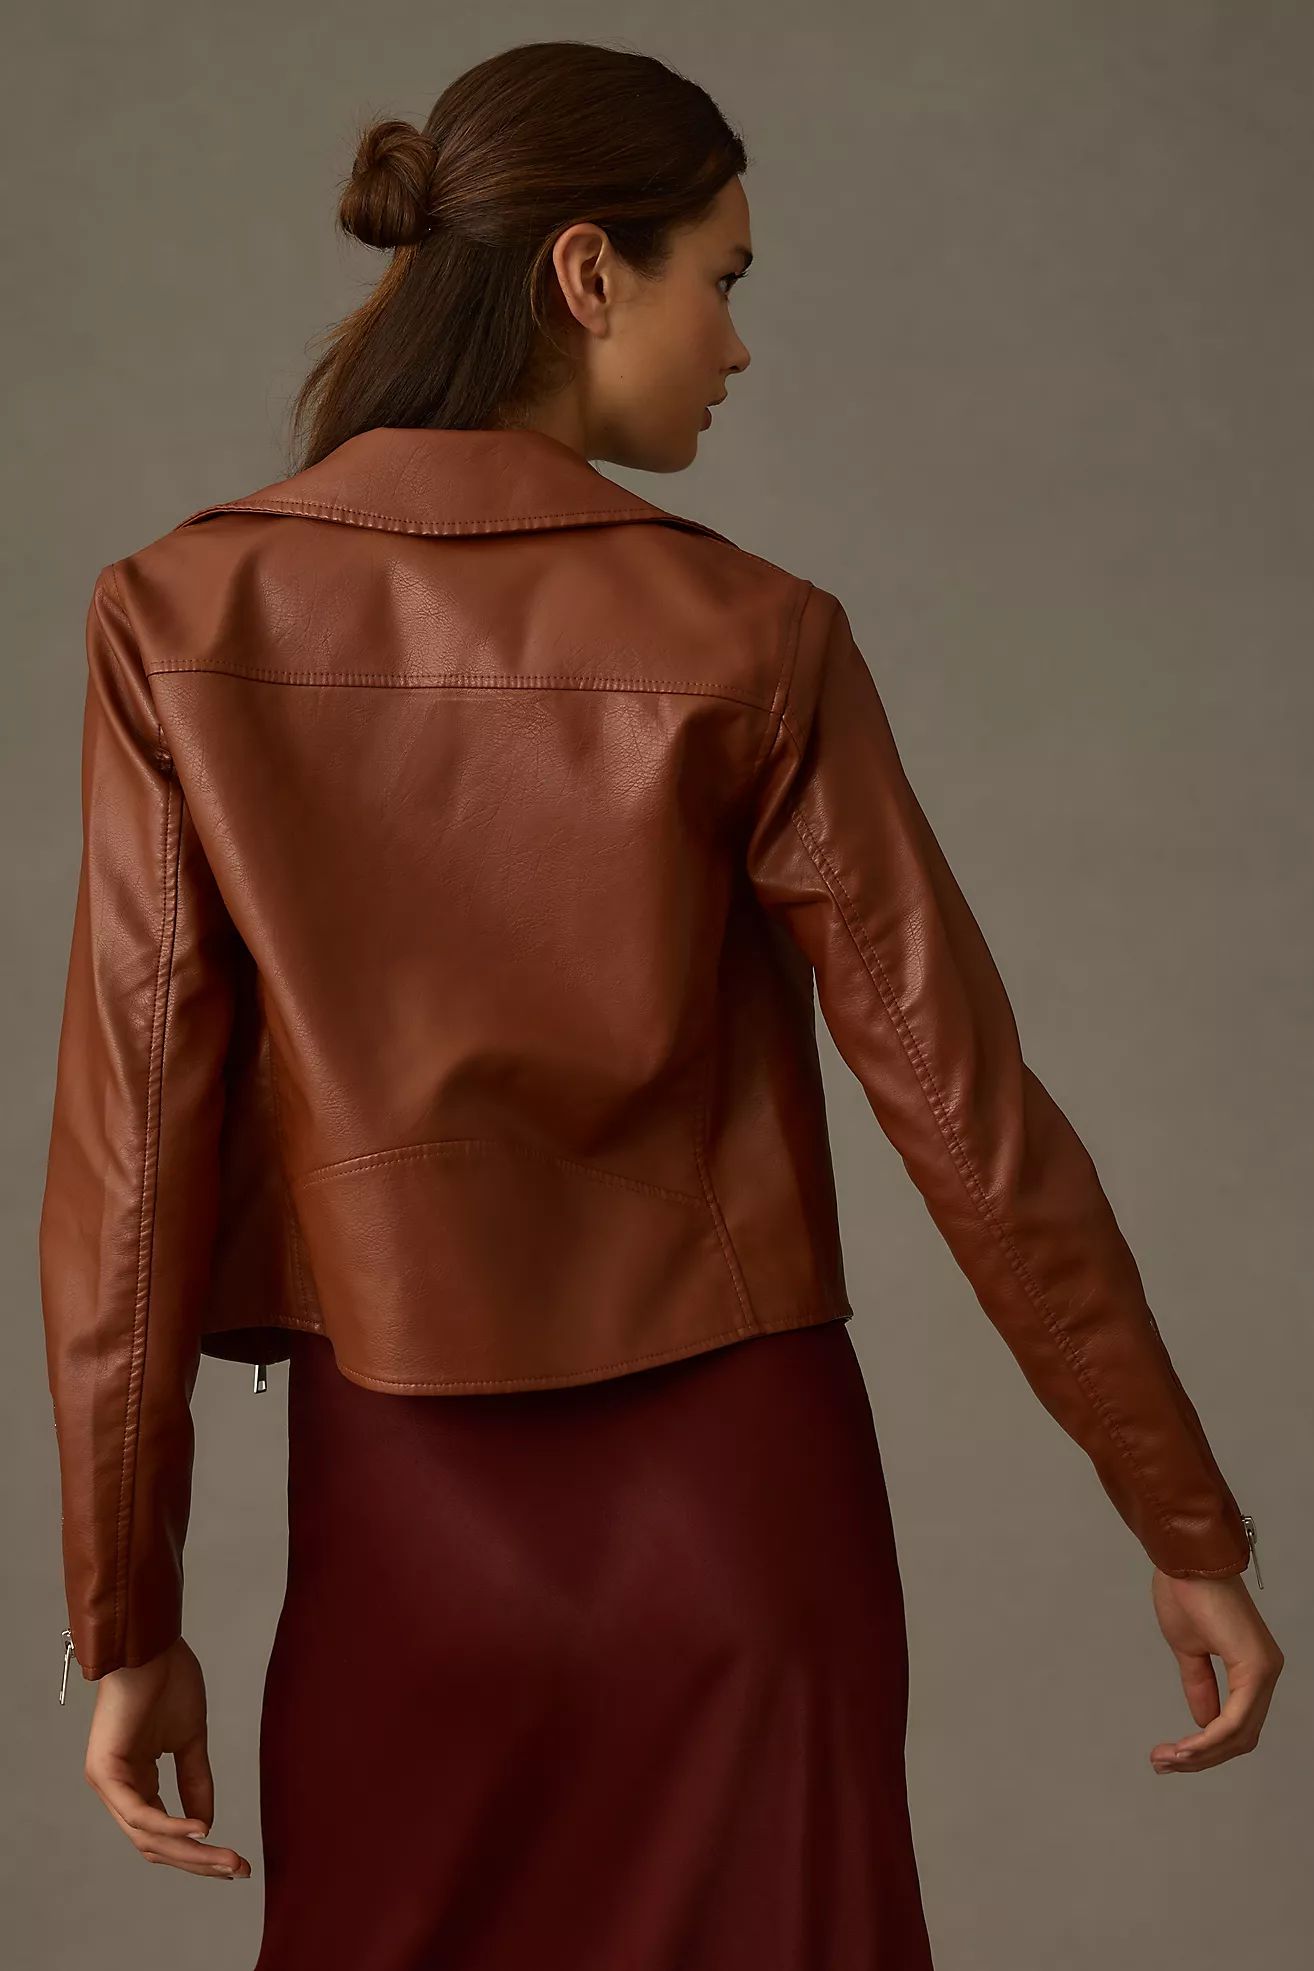 By Anthropologie Faux Leather Moto Jacket | Anthropologie (US)